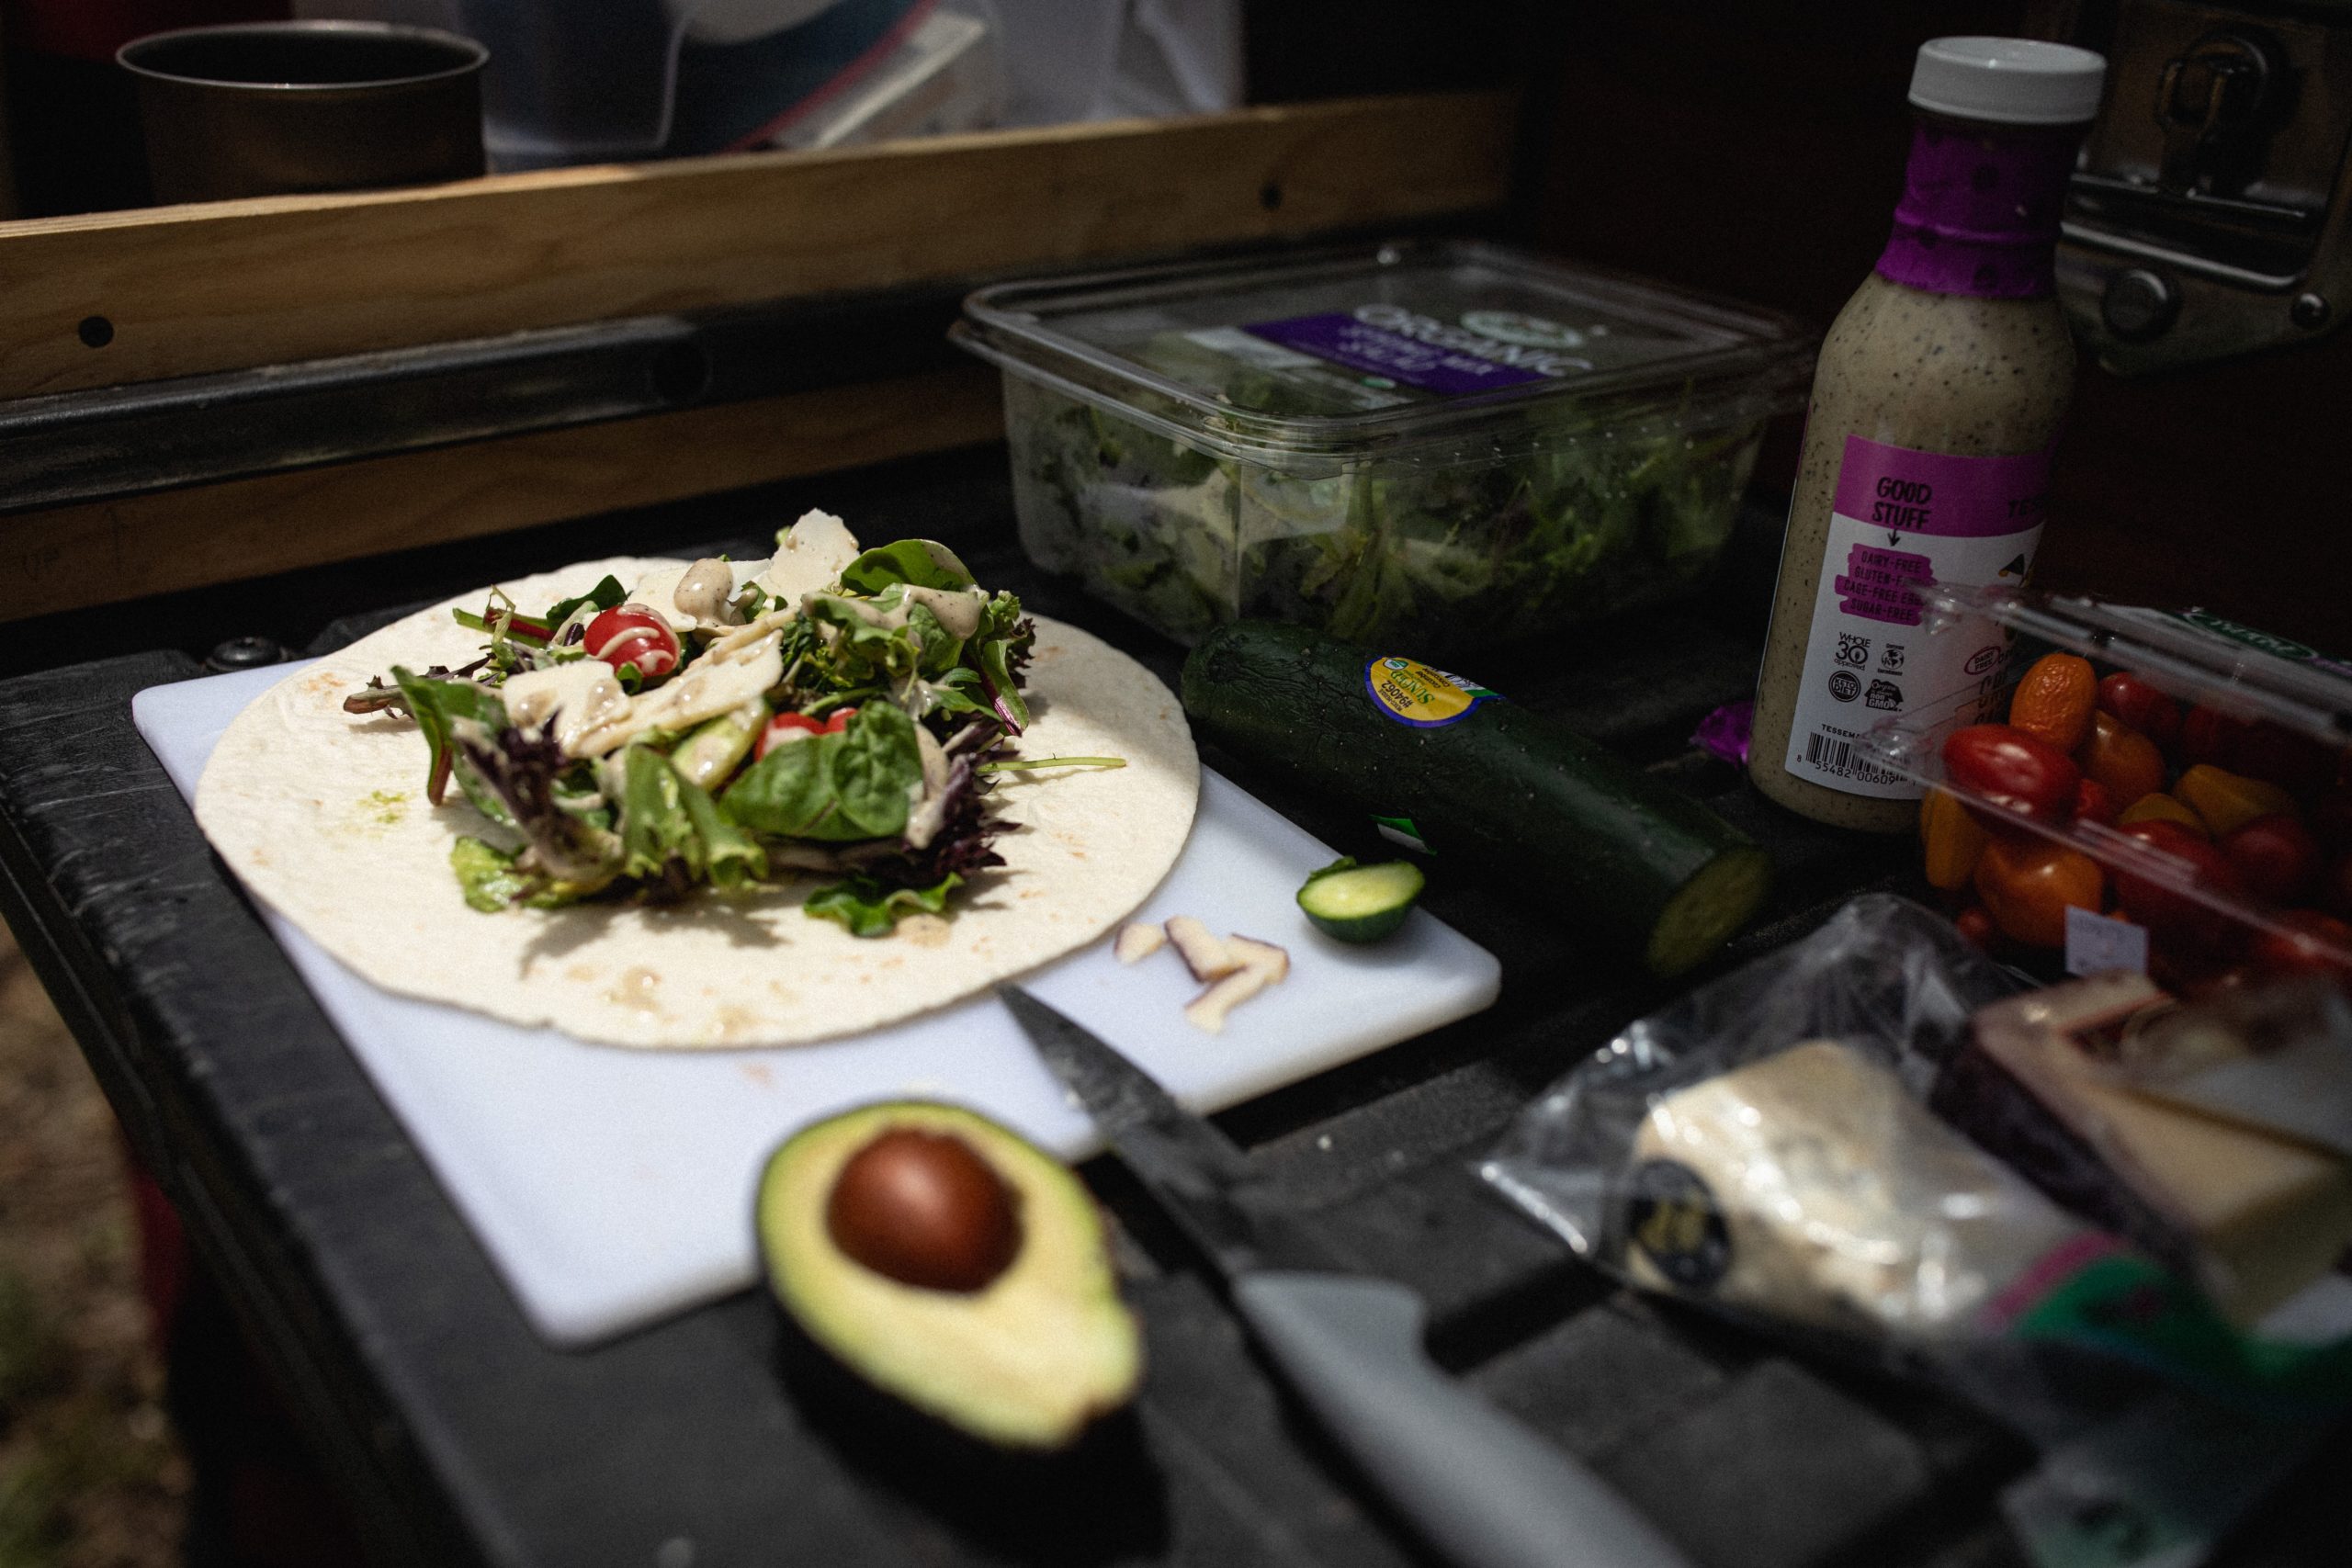 An open tortilla sits on a cutting board, topped with spring mix, halved cherry tomatoes, and salad dressing. A halved avocado, a cucumber, and some cheese also sit on the table.